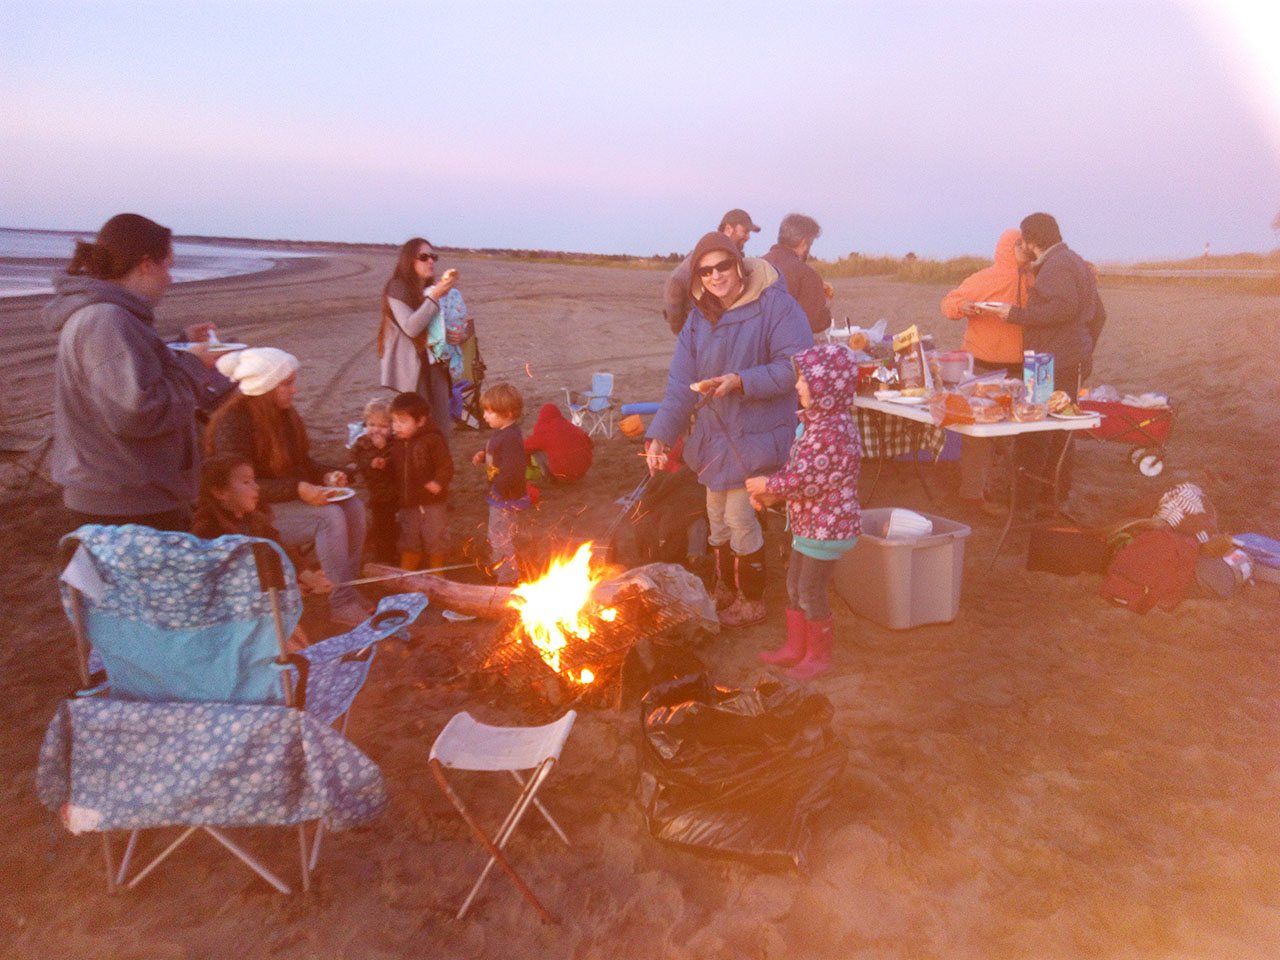 Family barbecue on the beach.